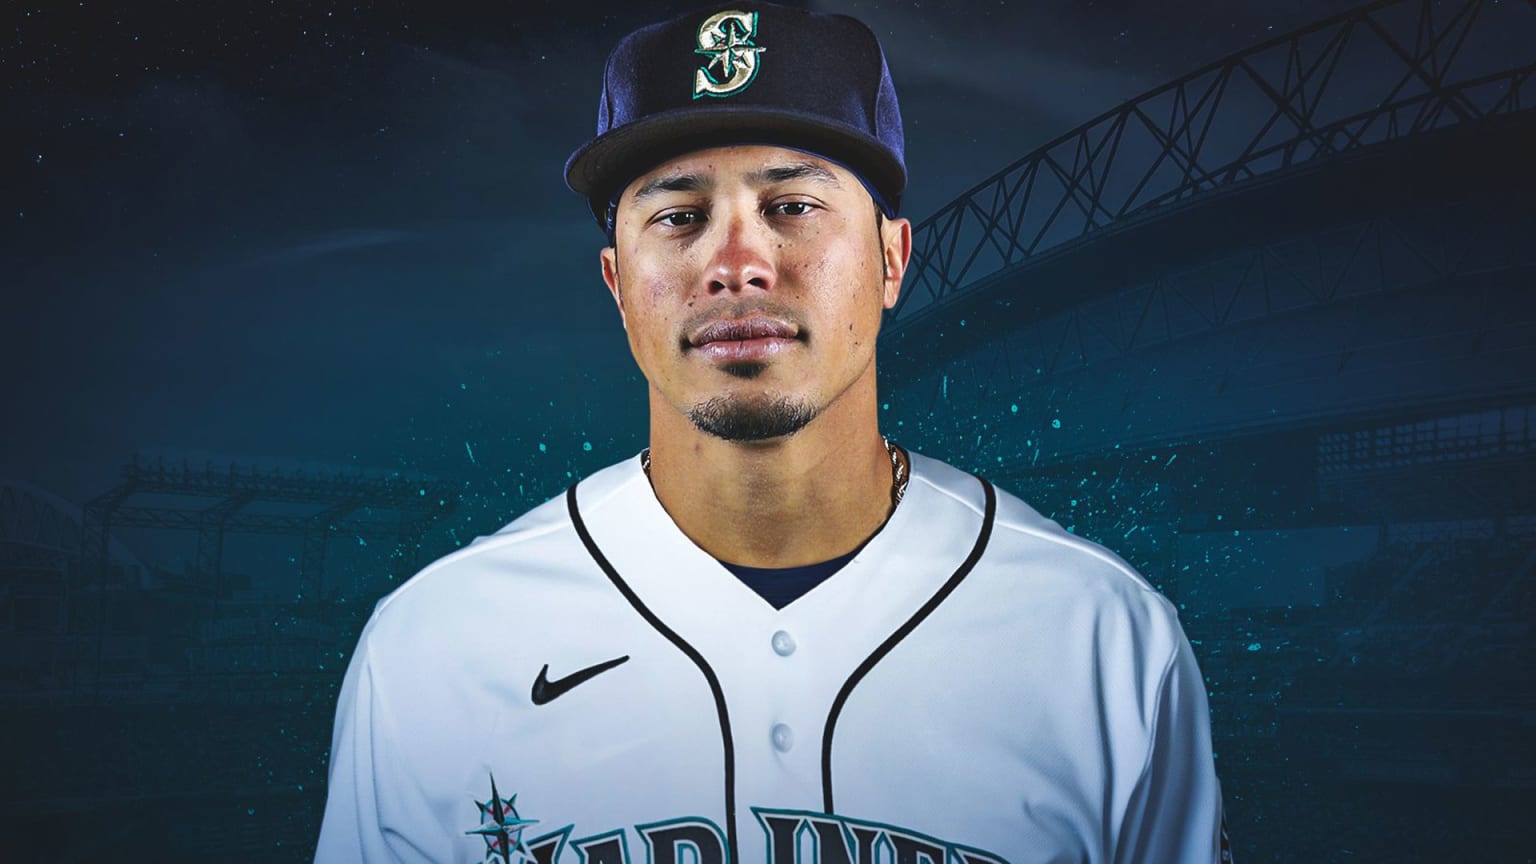 A photo illustration showing Kolten Wong in a Mariners uniform